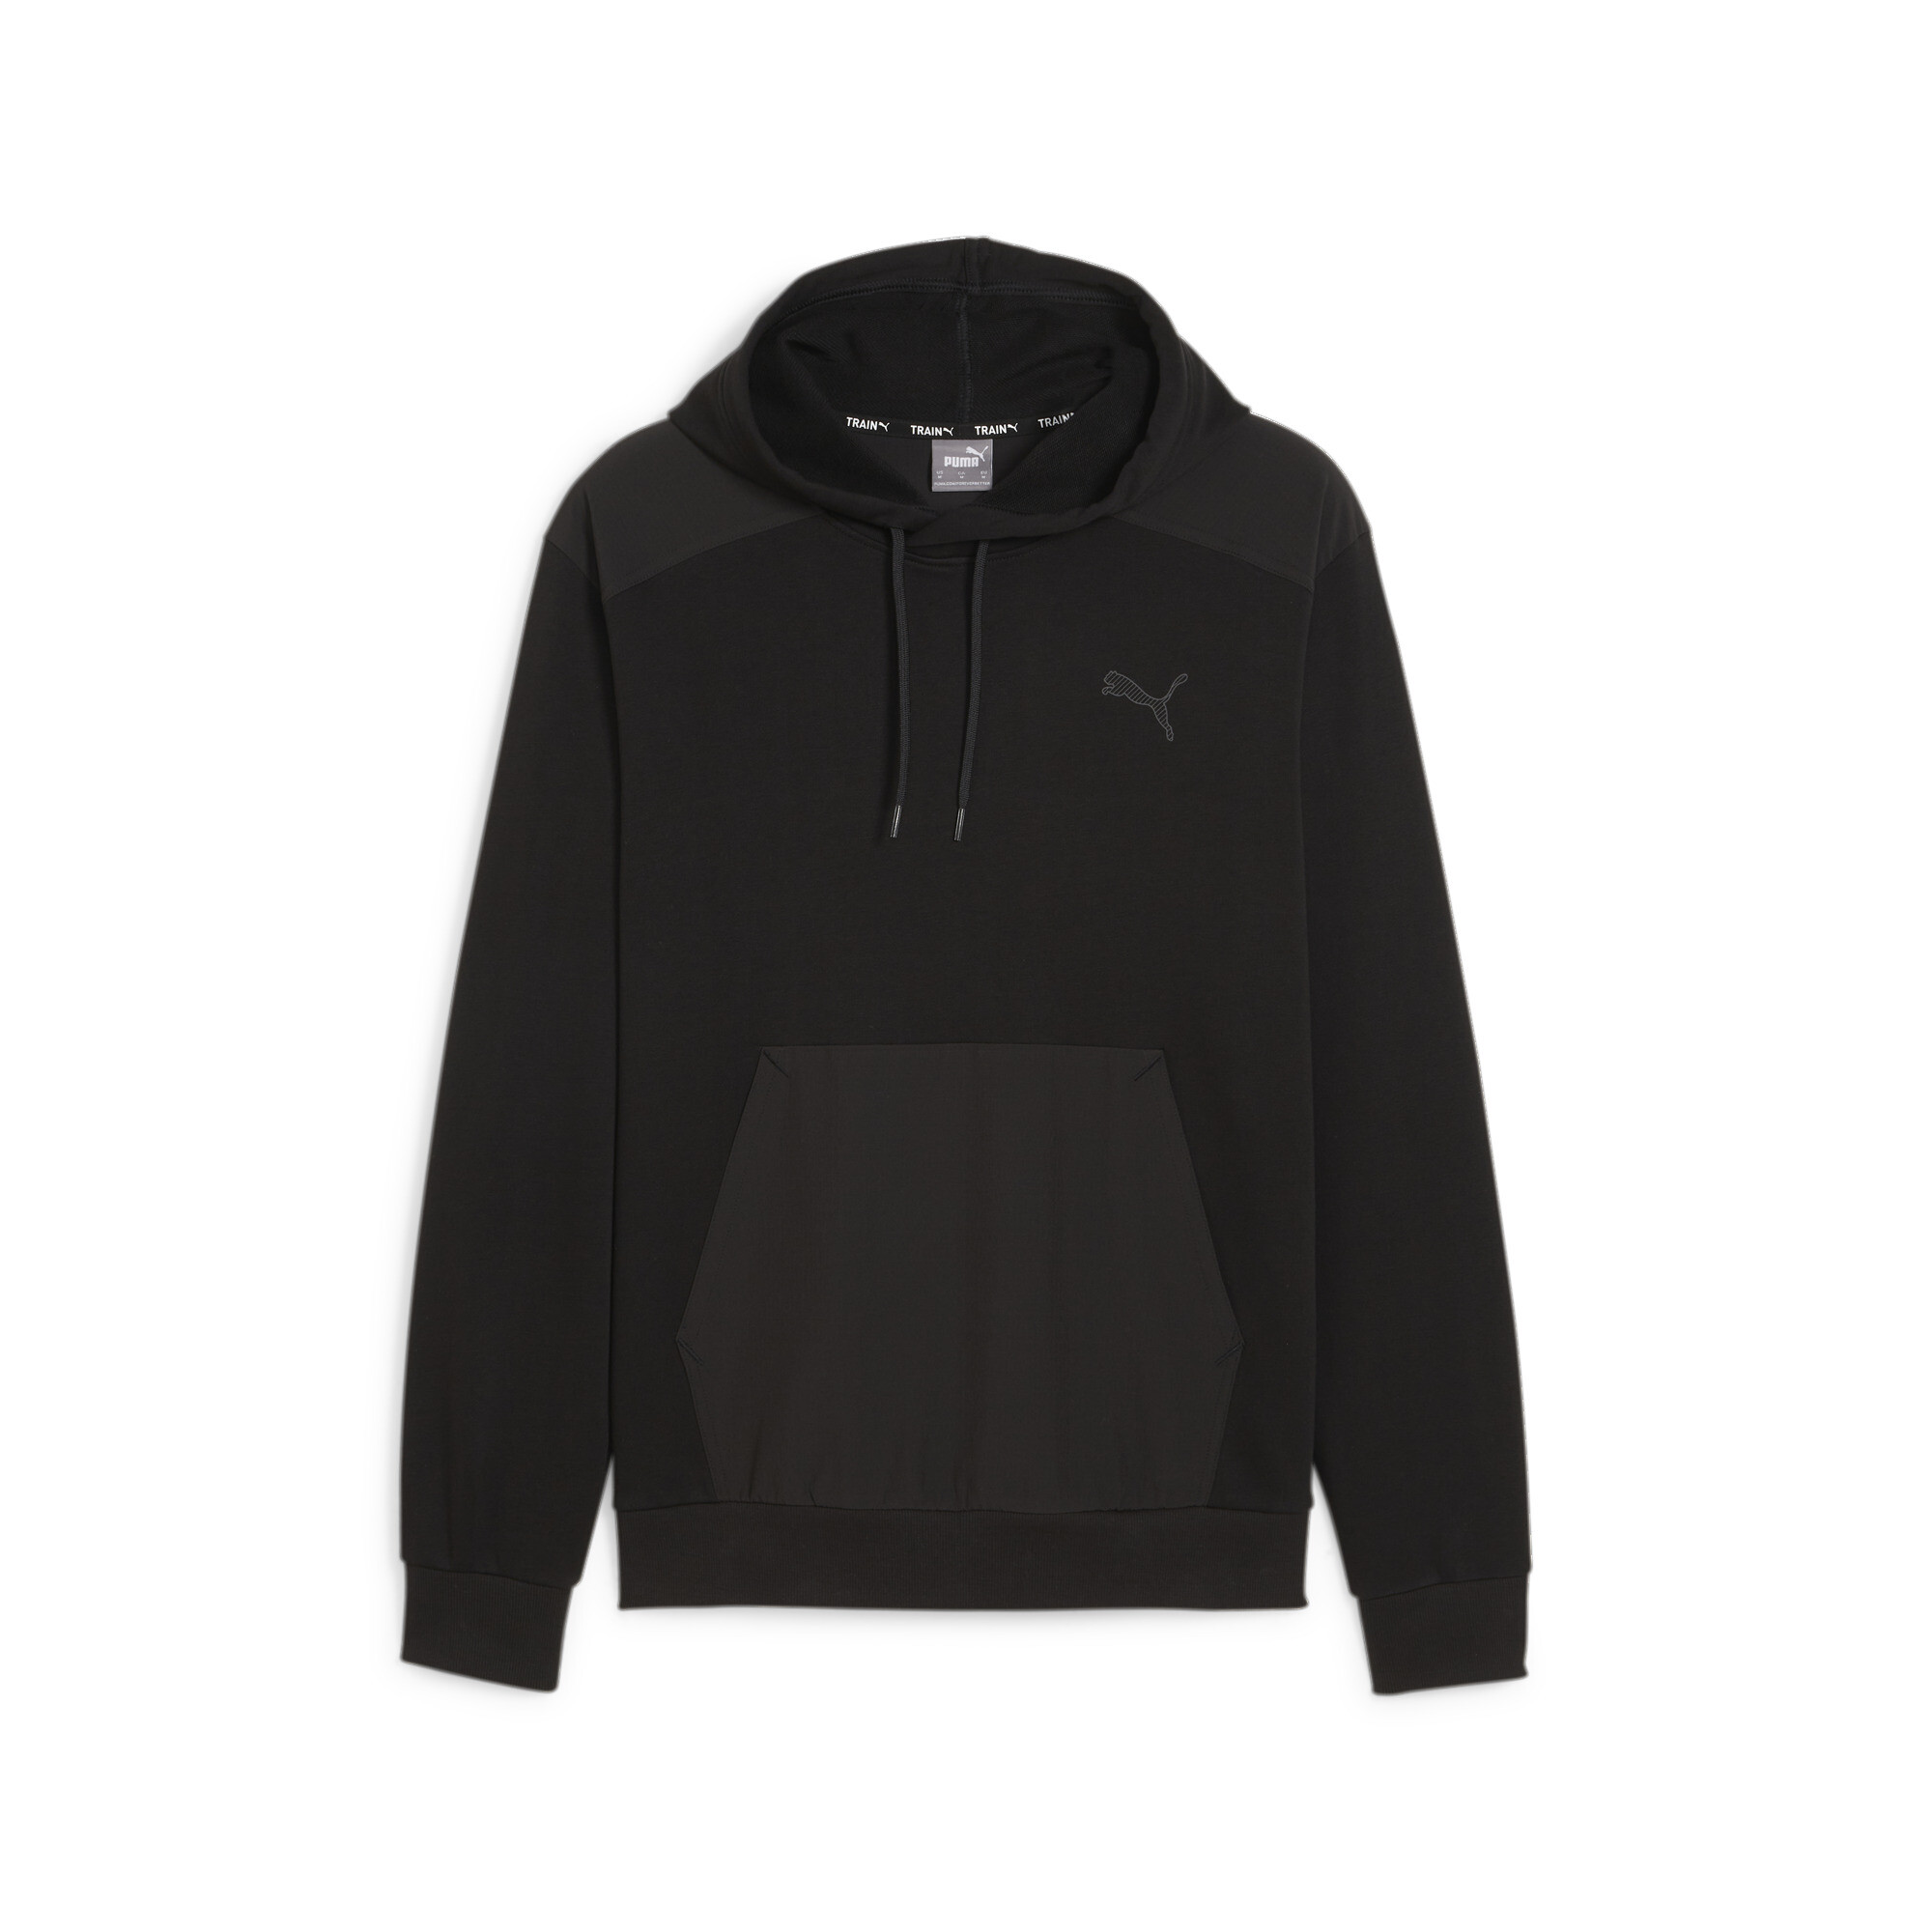 Men's PUMA M Concept Training Knit Hoodie In Black, Size XS